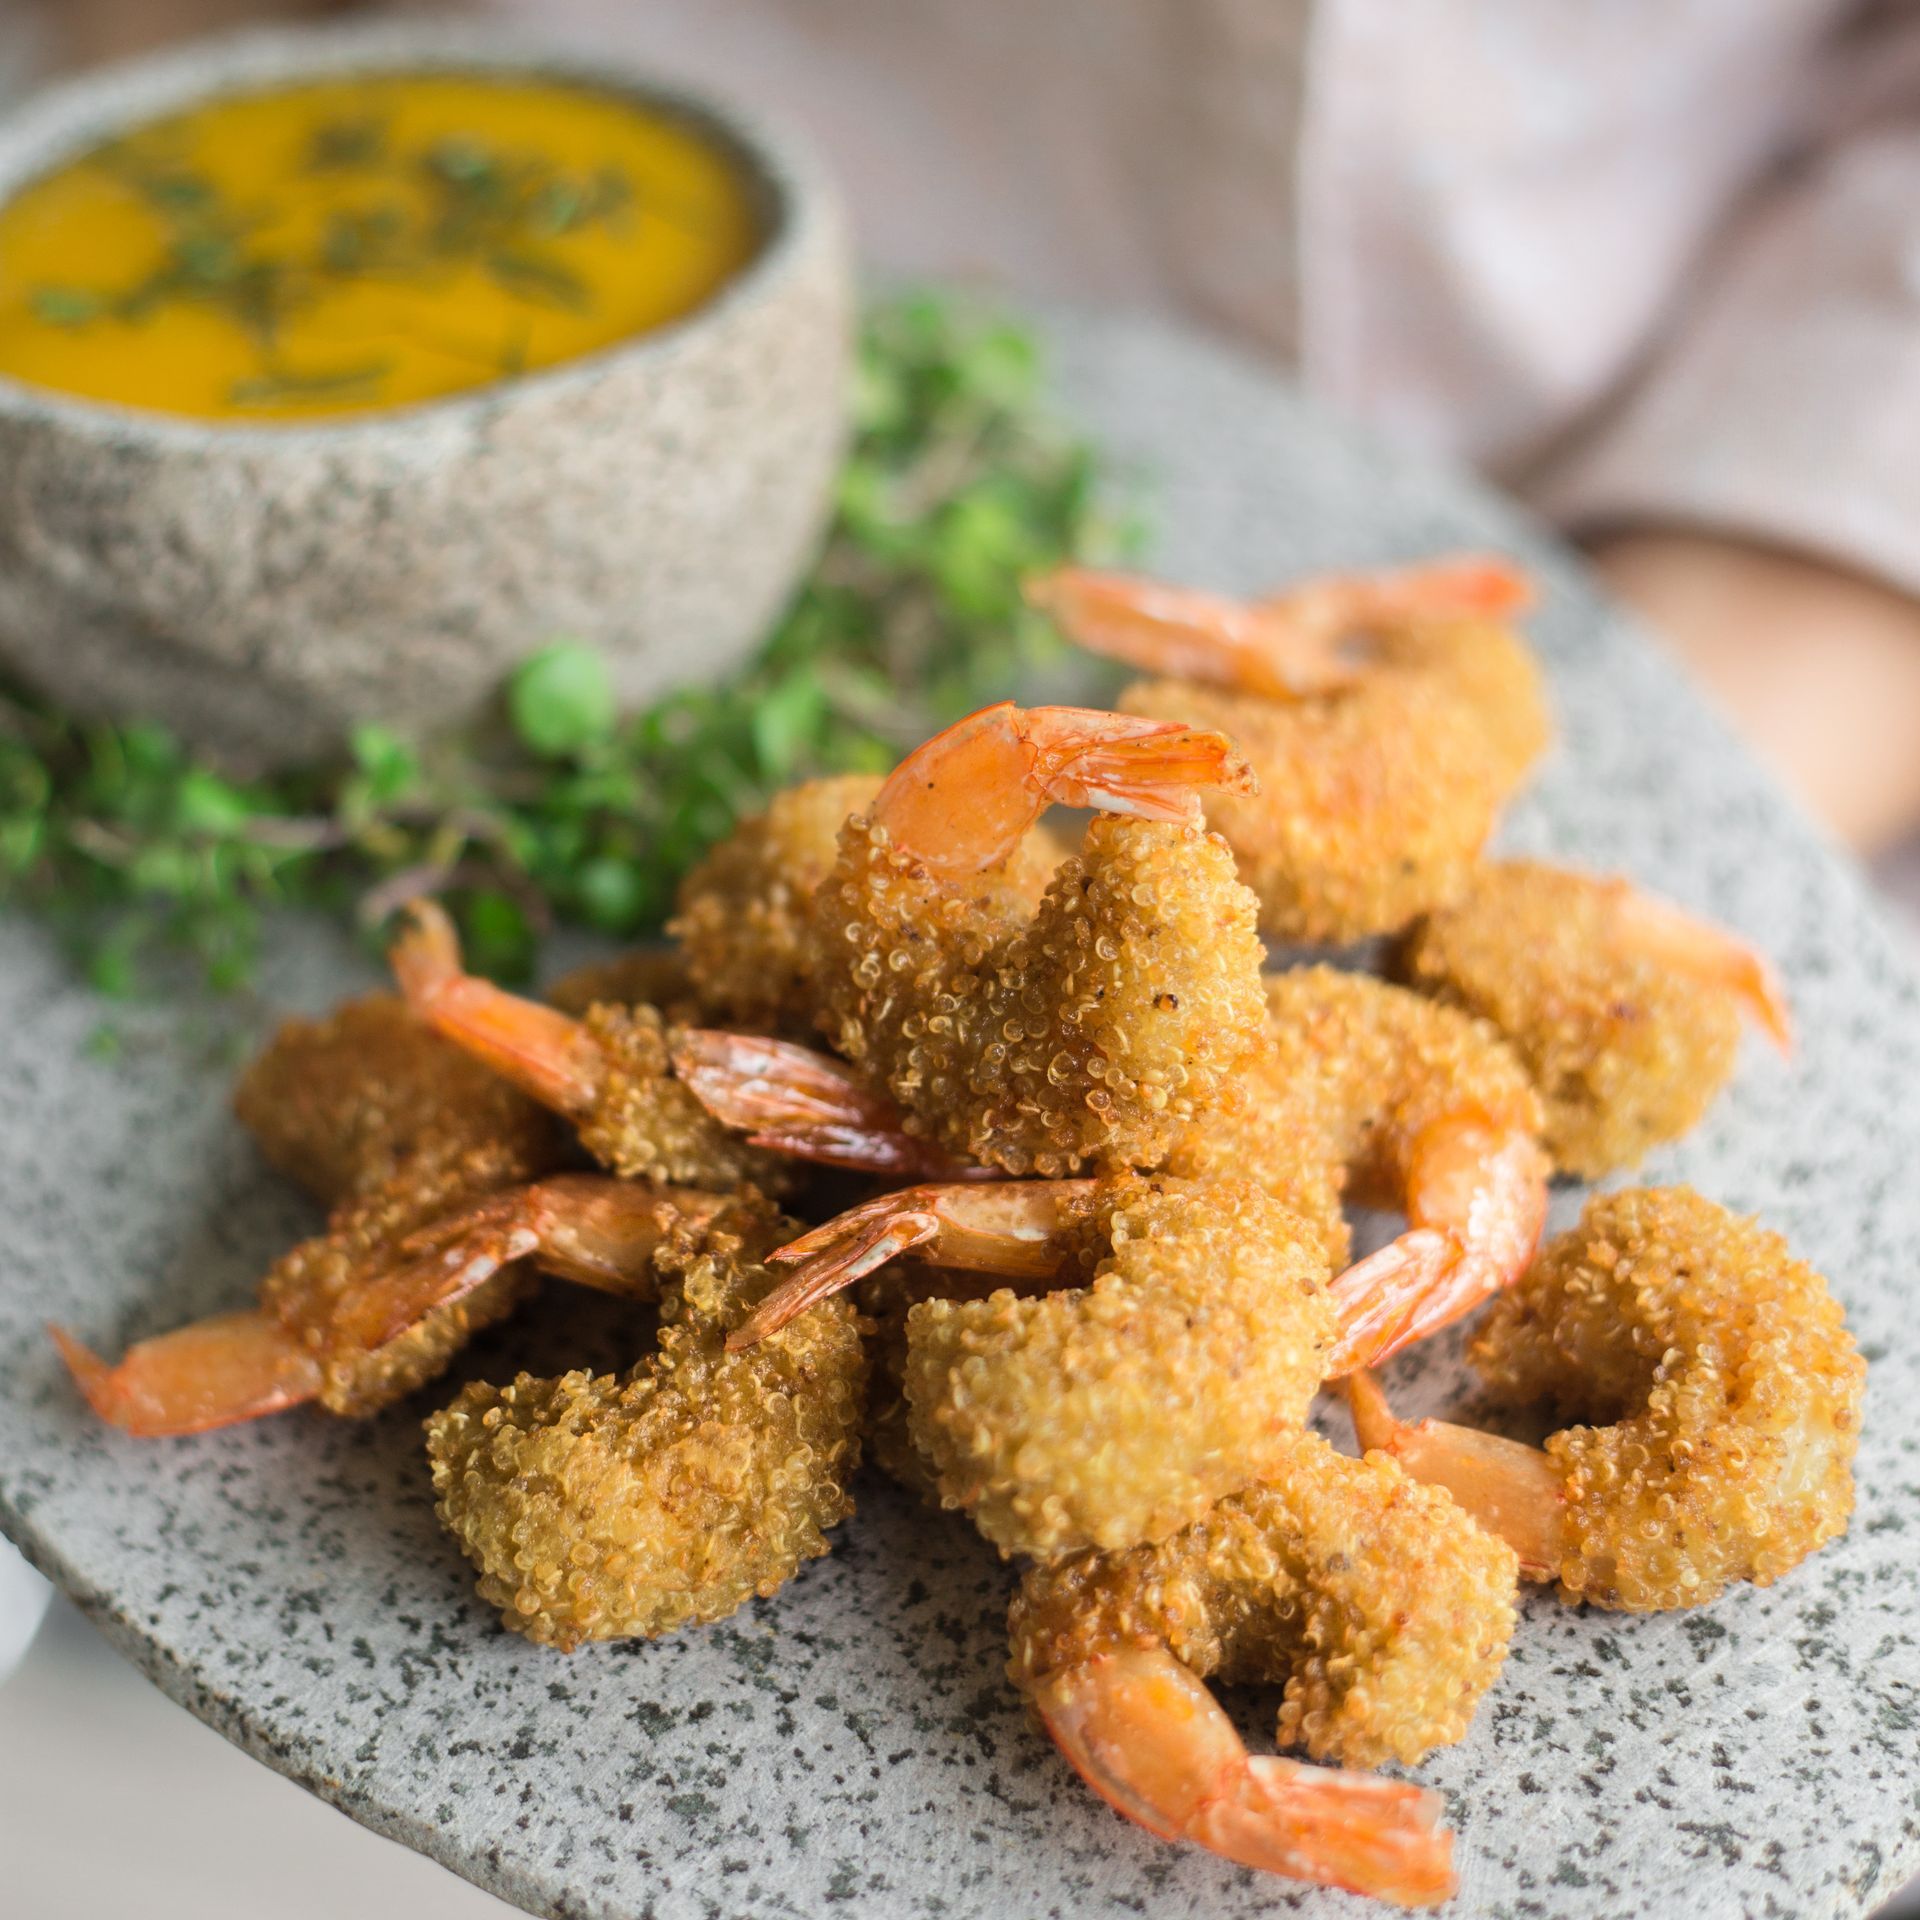 a plate of fried shrimp next to a bowl of dipping sauce .